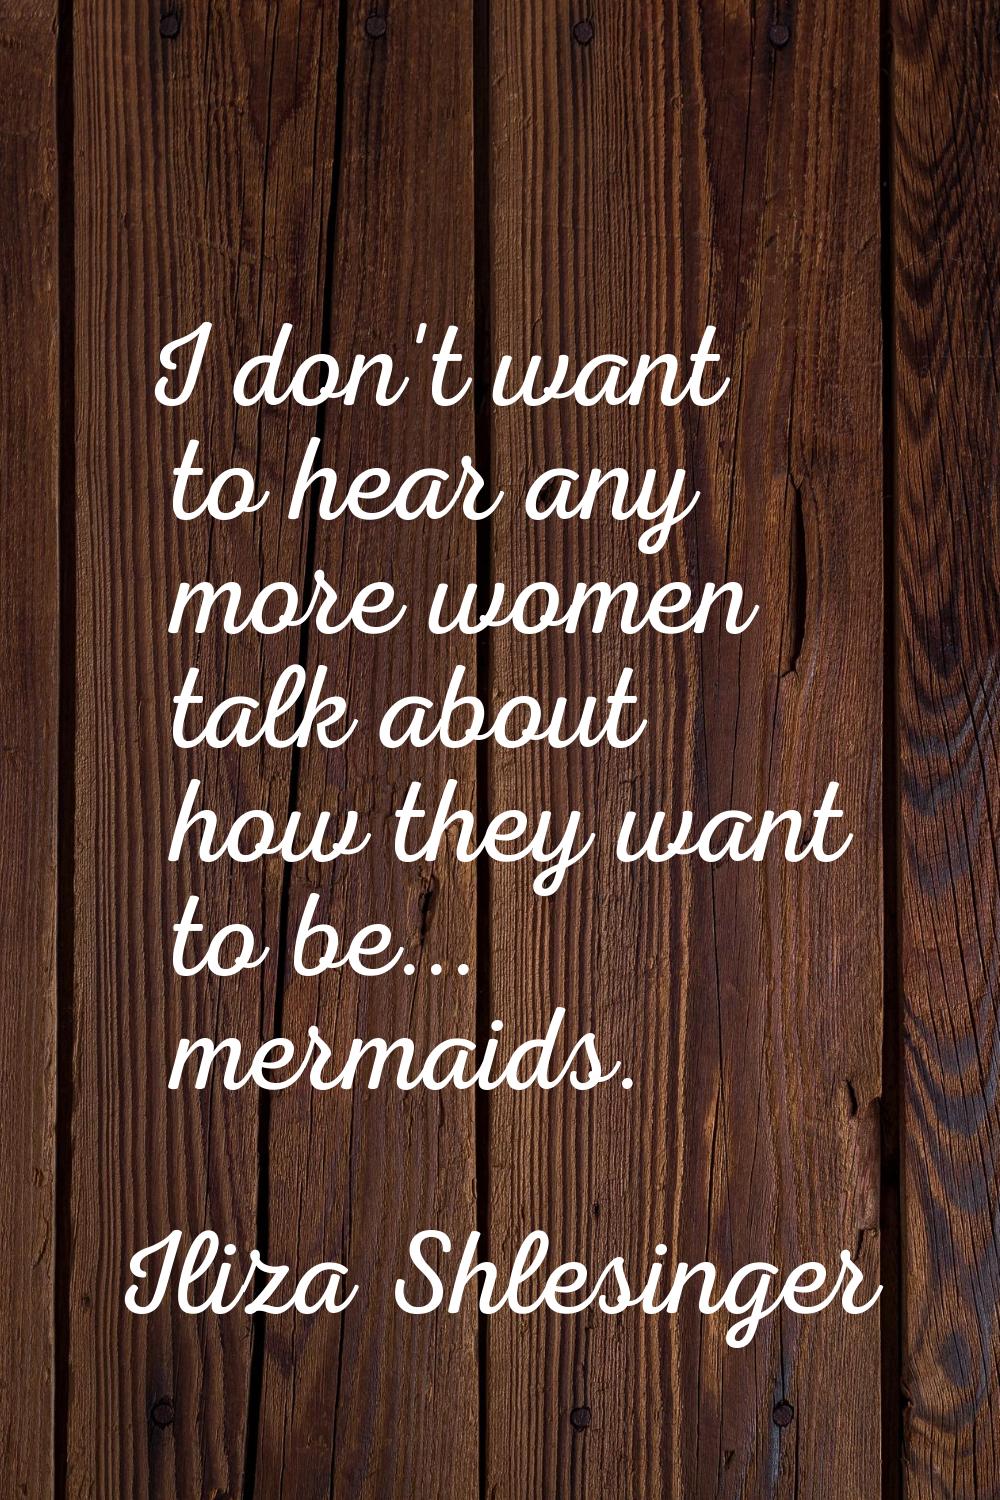 I don't want to hear any more women talk about how they want to be... mermaids.